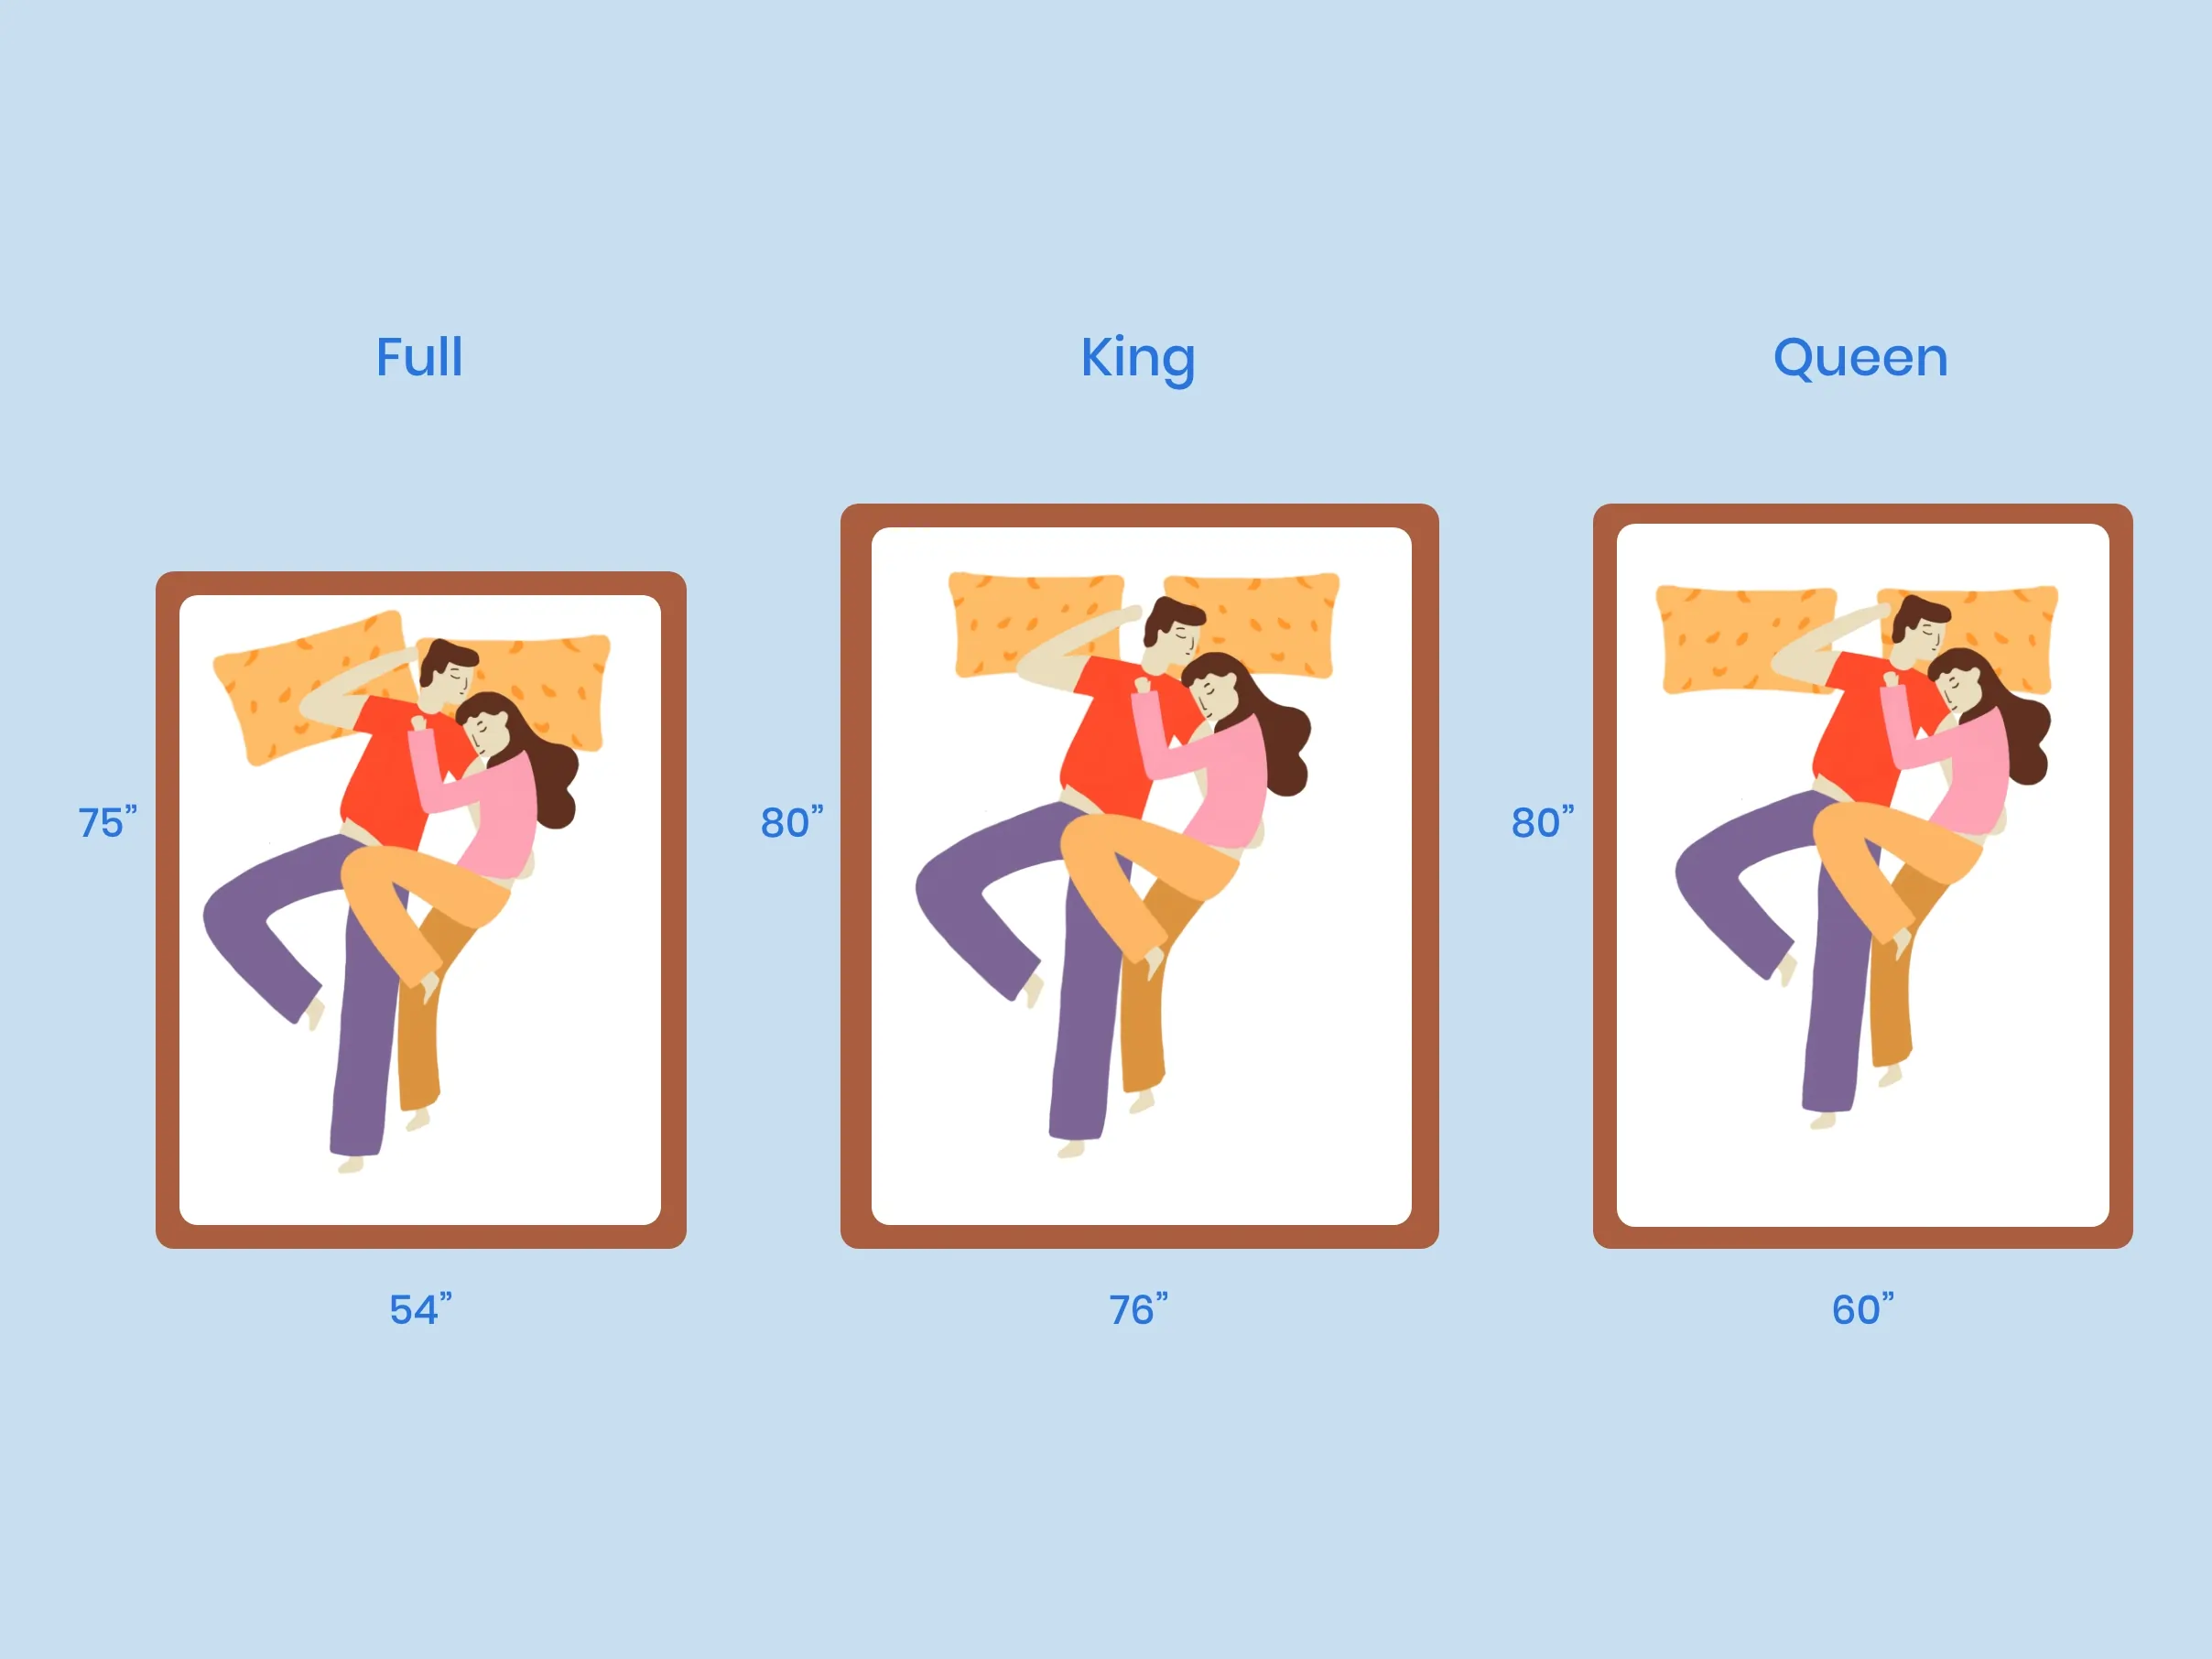 Understanding Twin, Queen, and King Bed Size Dimensions